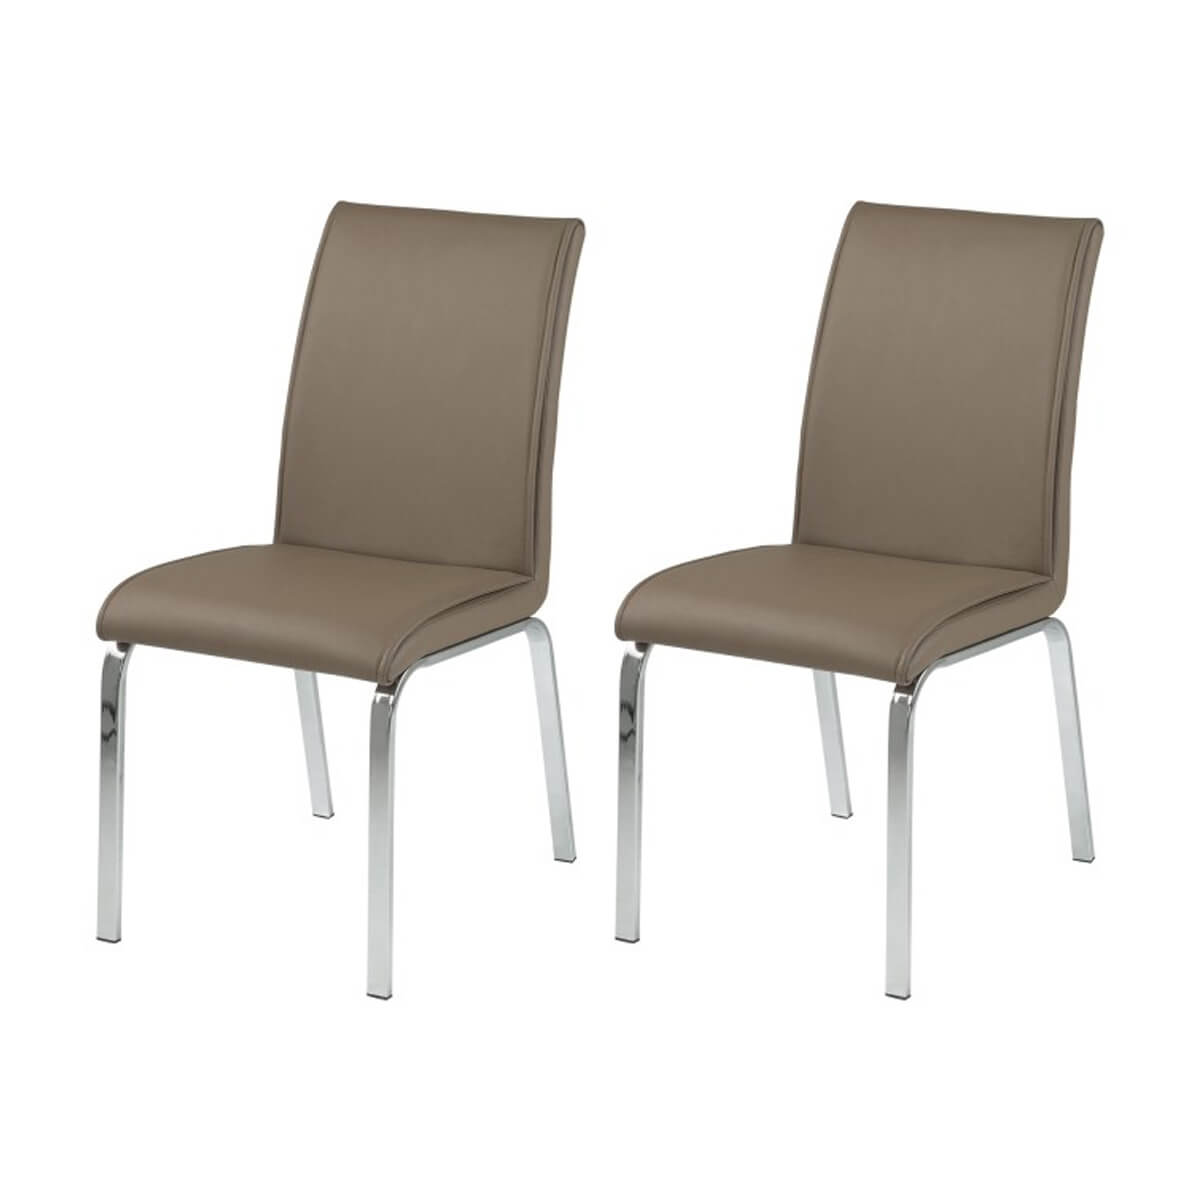 Leonora Taupe Faux Leather Dining, Taupe Leather Dining Chairs Uk